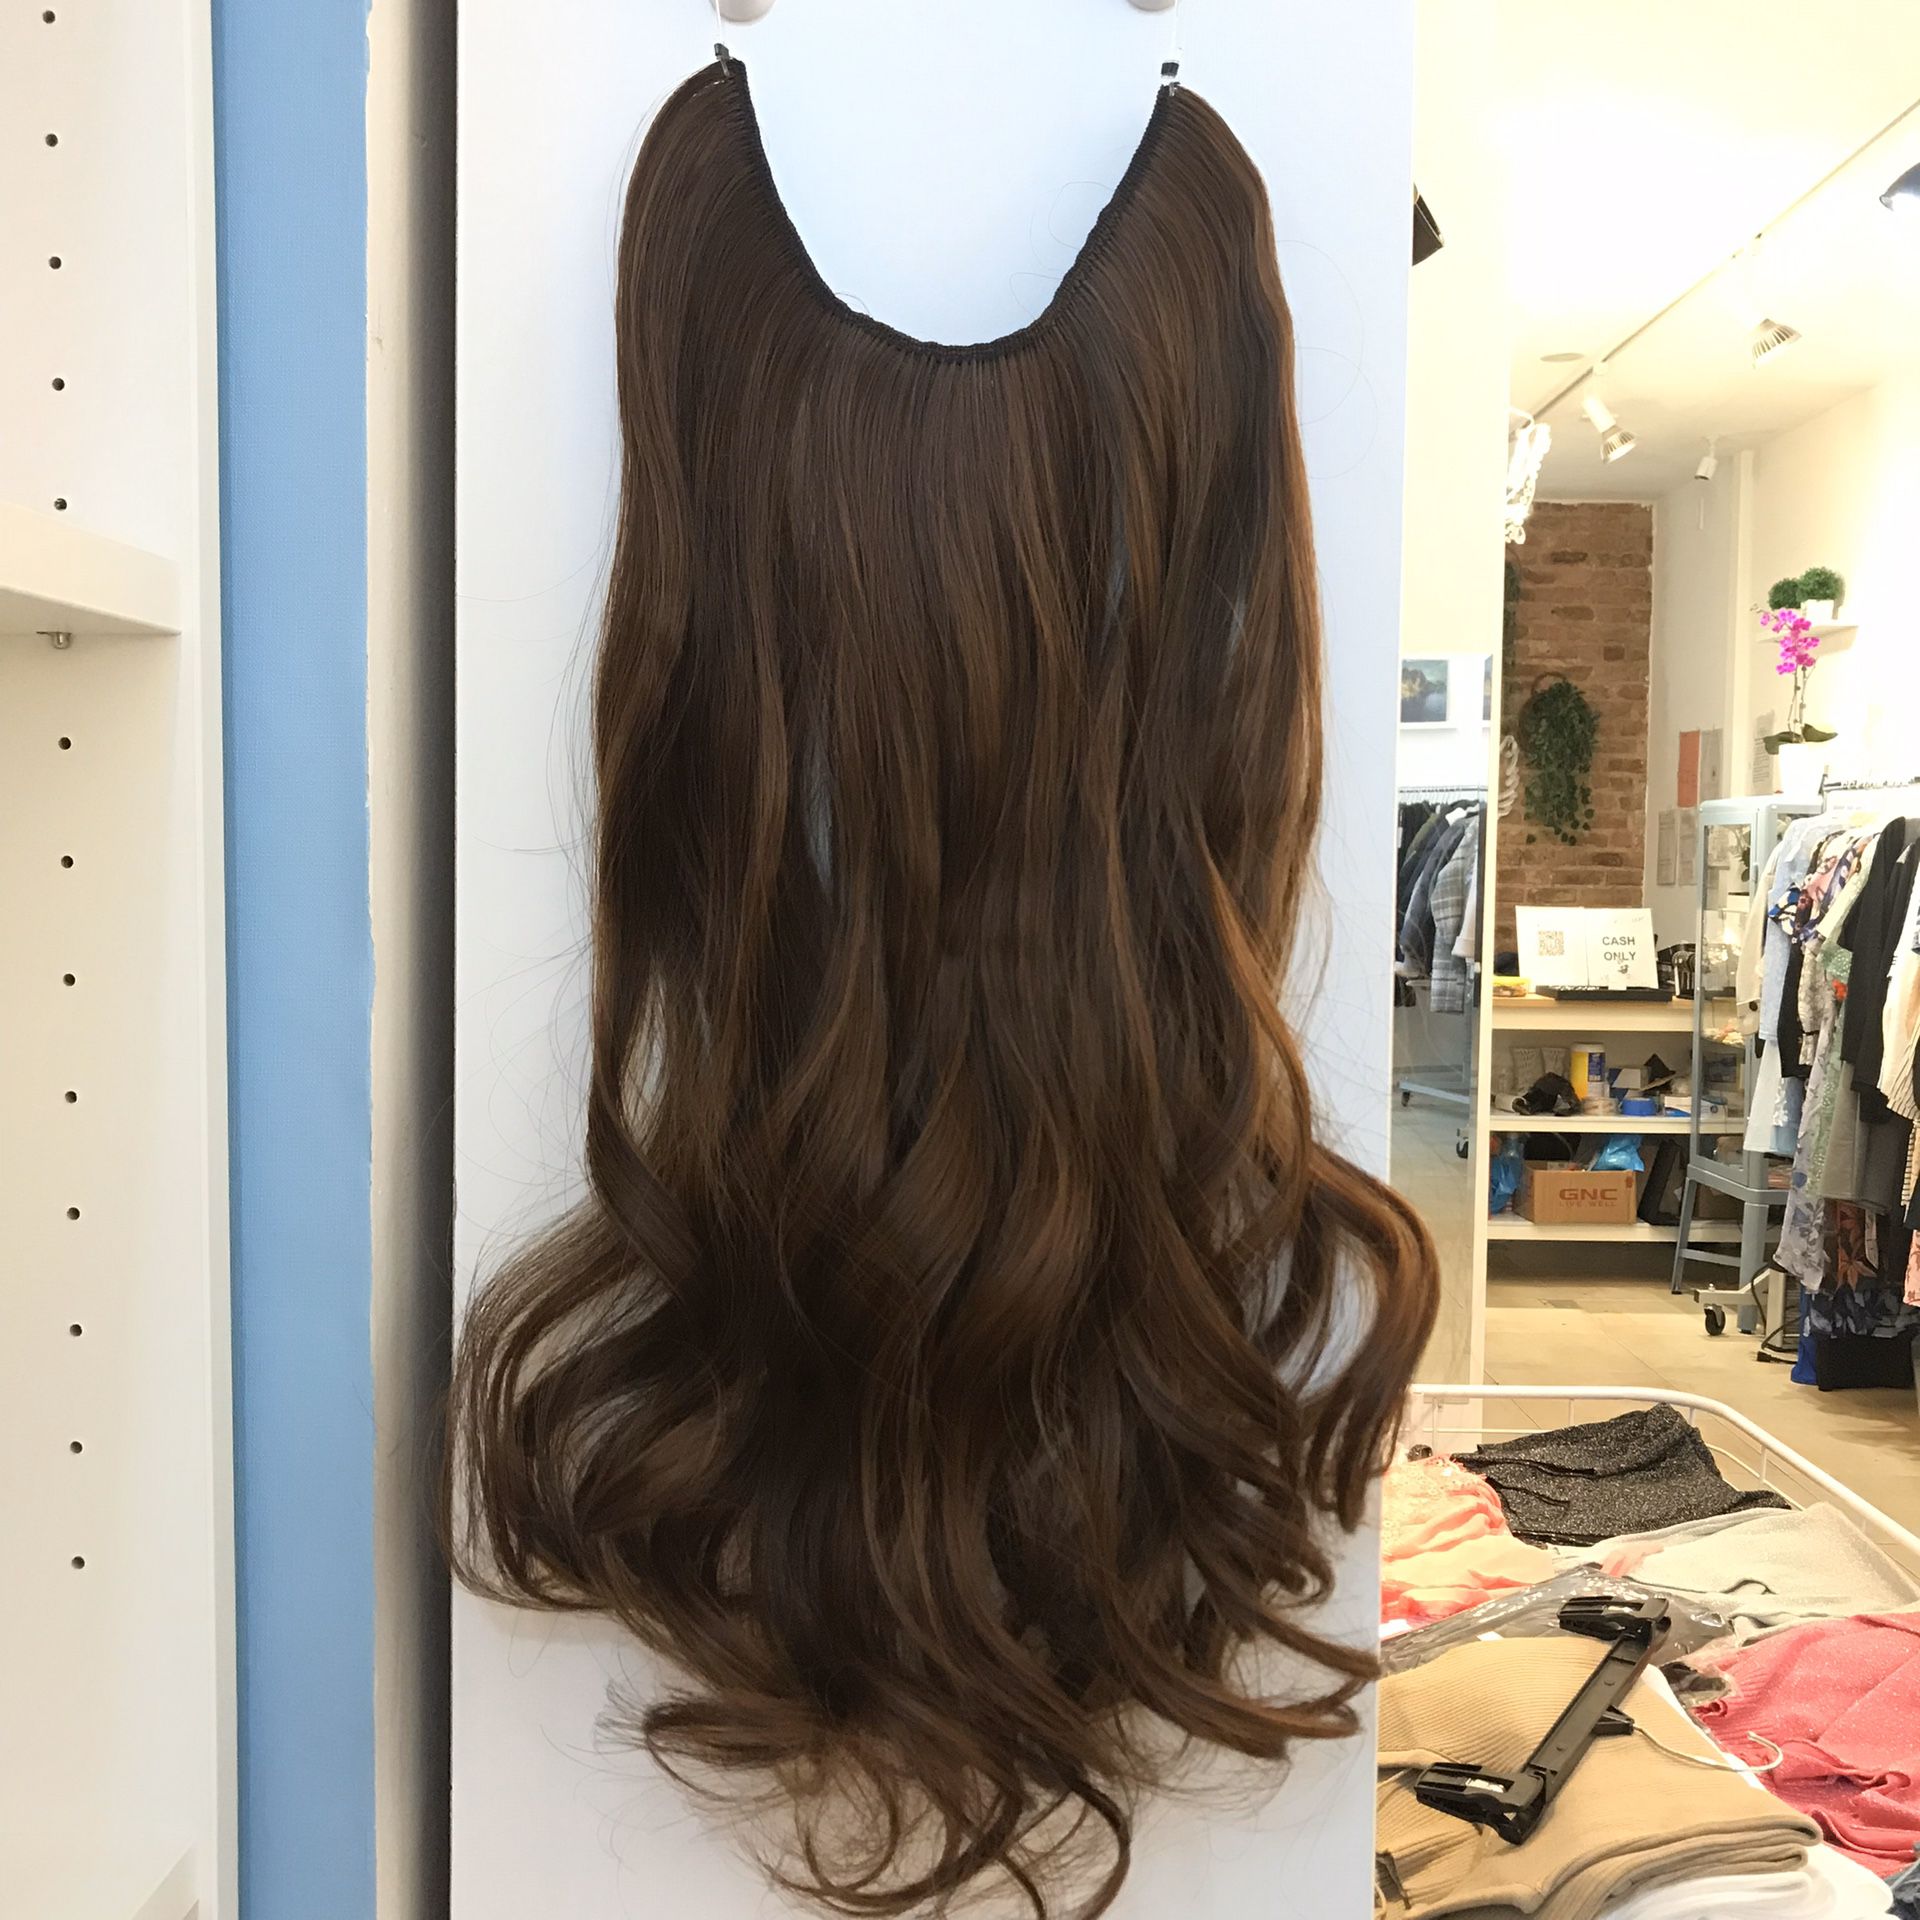 22” Fish line band hair extensions